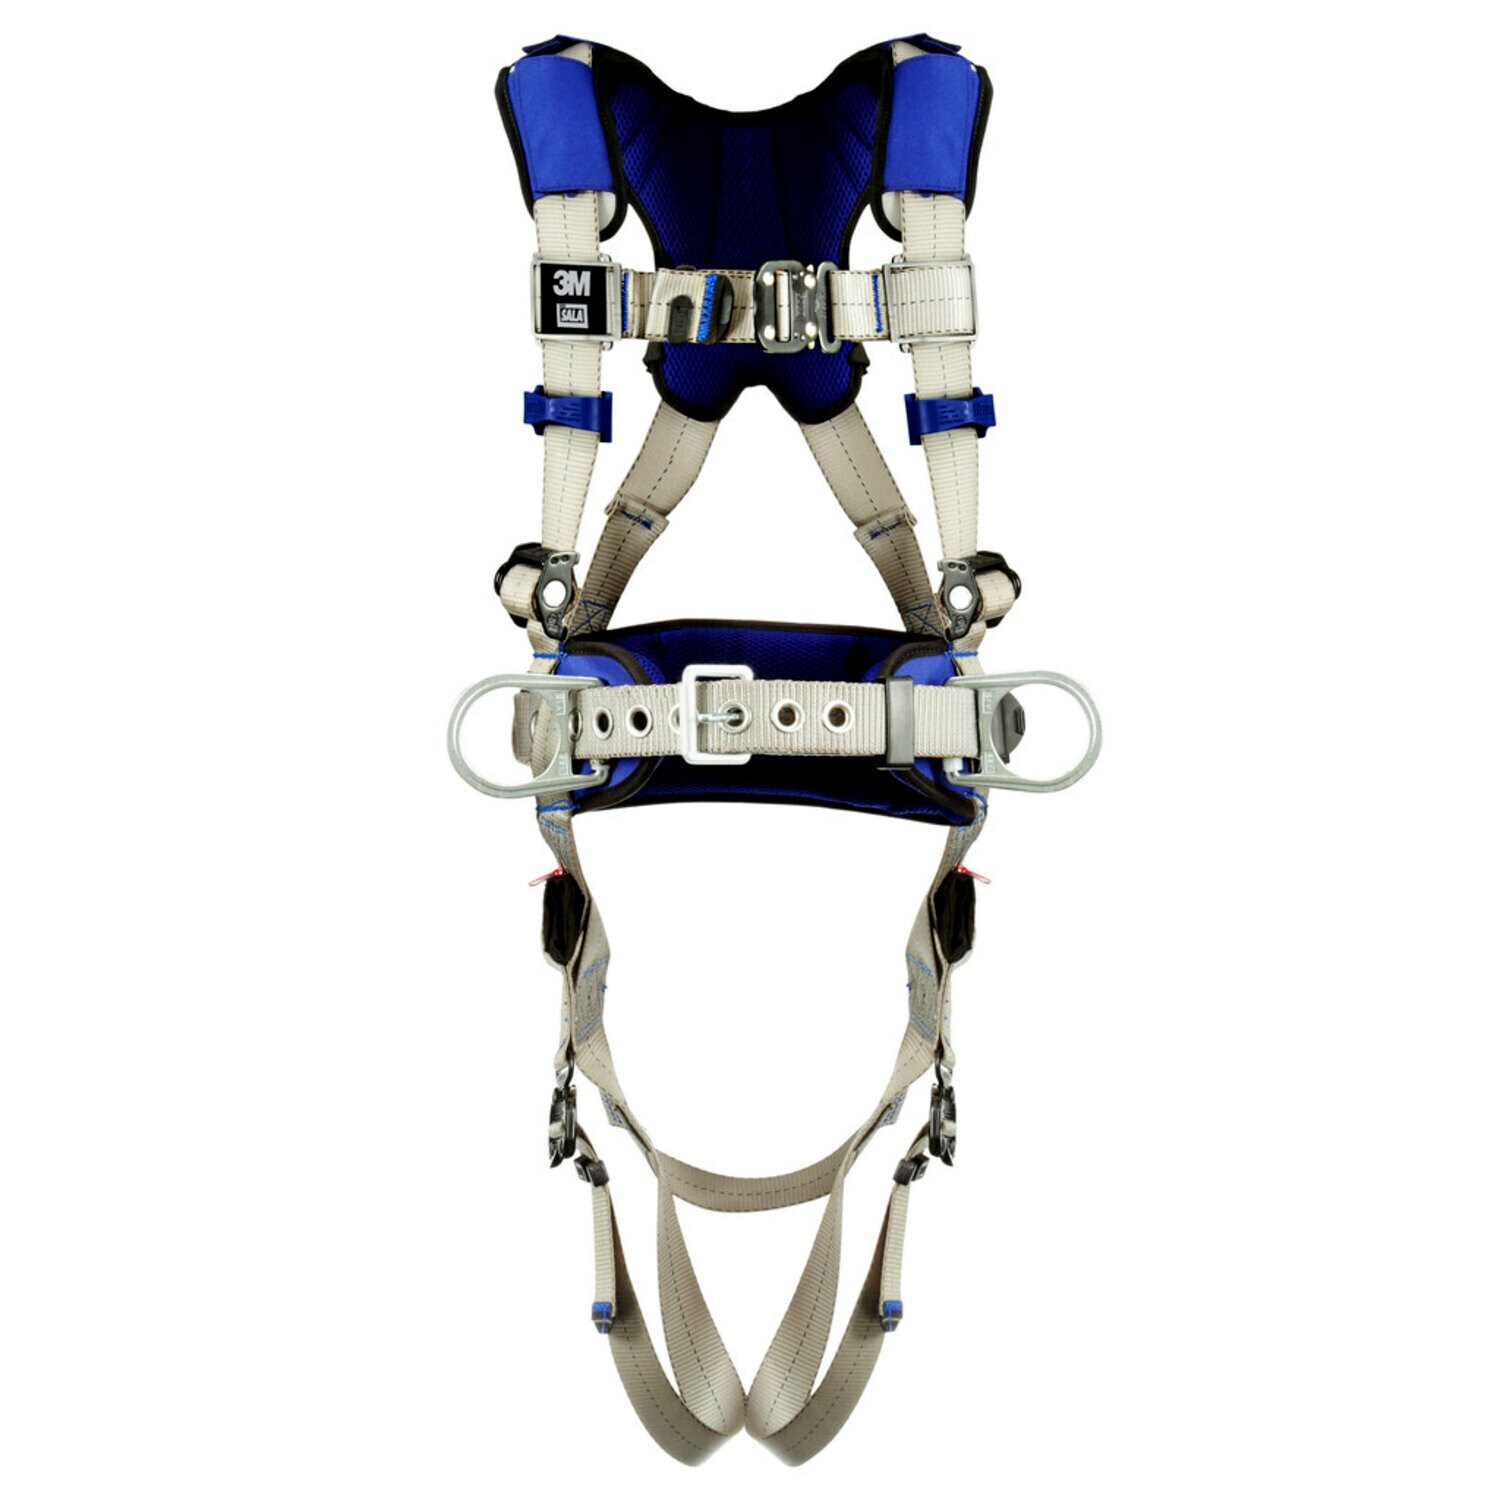 7012817570 - 3M DBI-SALA ExoFit X100 Comfort Construction Positioning Safety Harness 1401090, Small